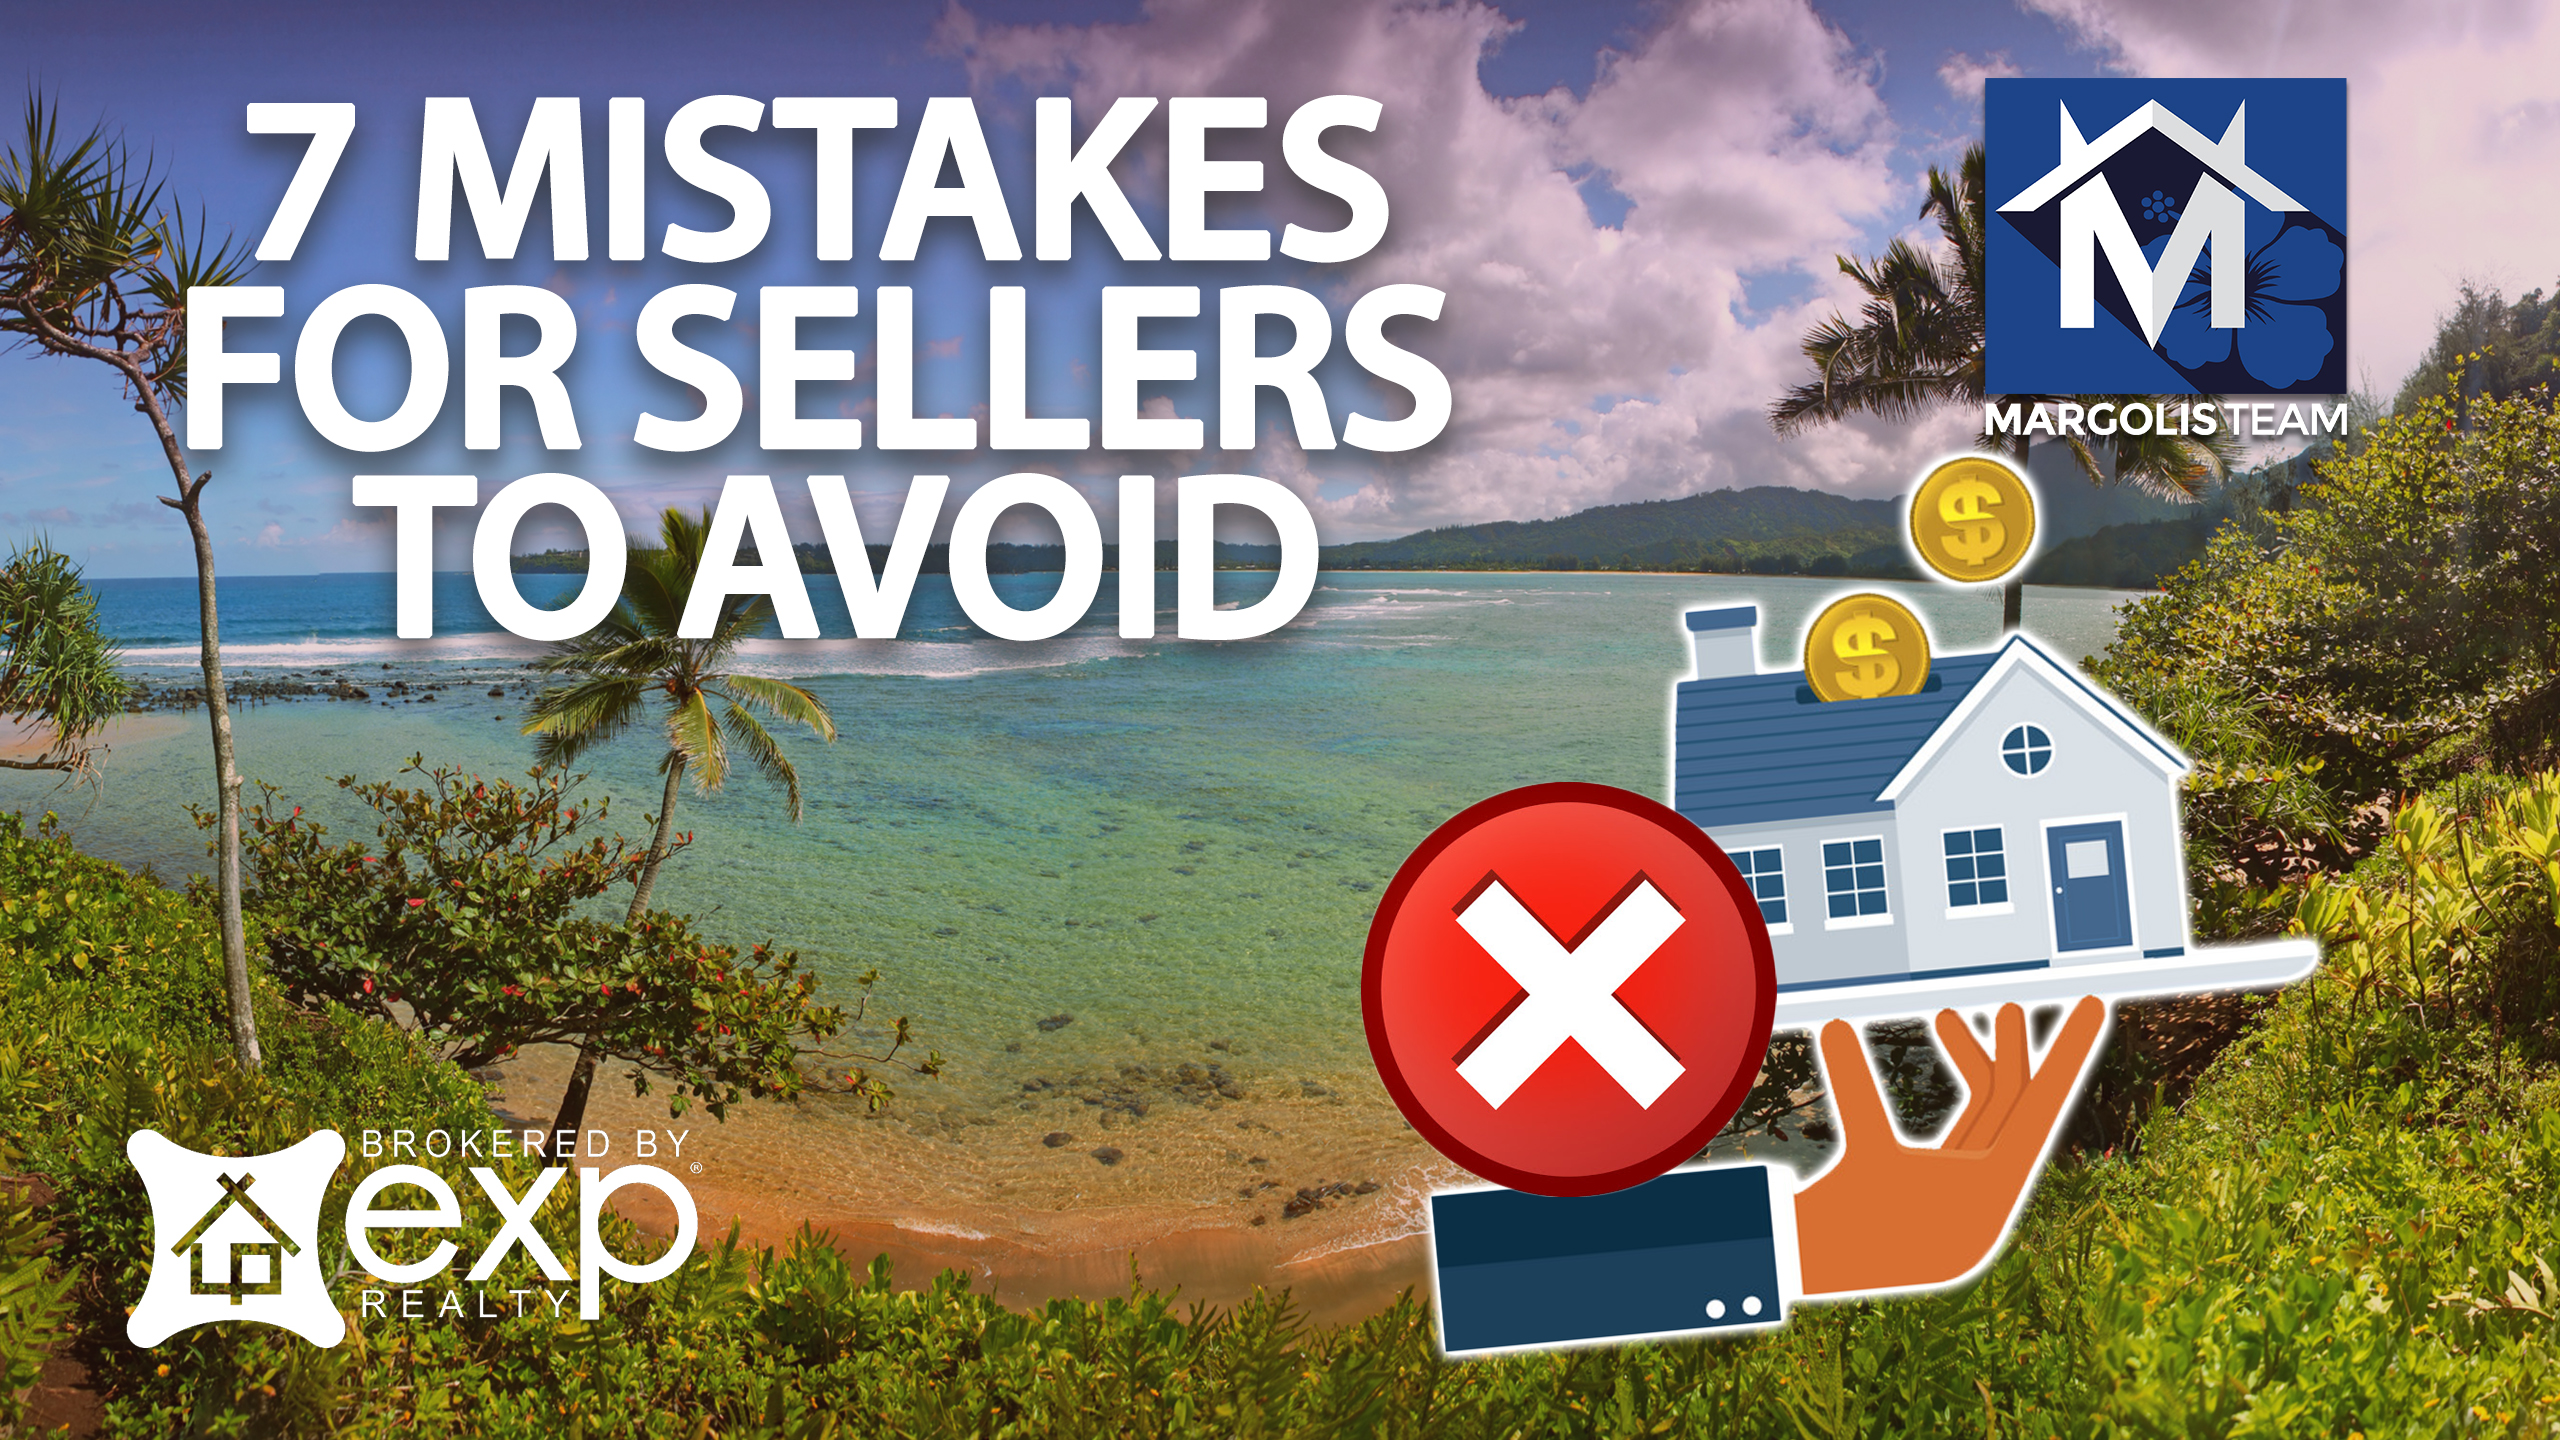 Q: Which Mistakes Should You Avoid as a Home Seller?